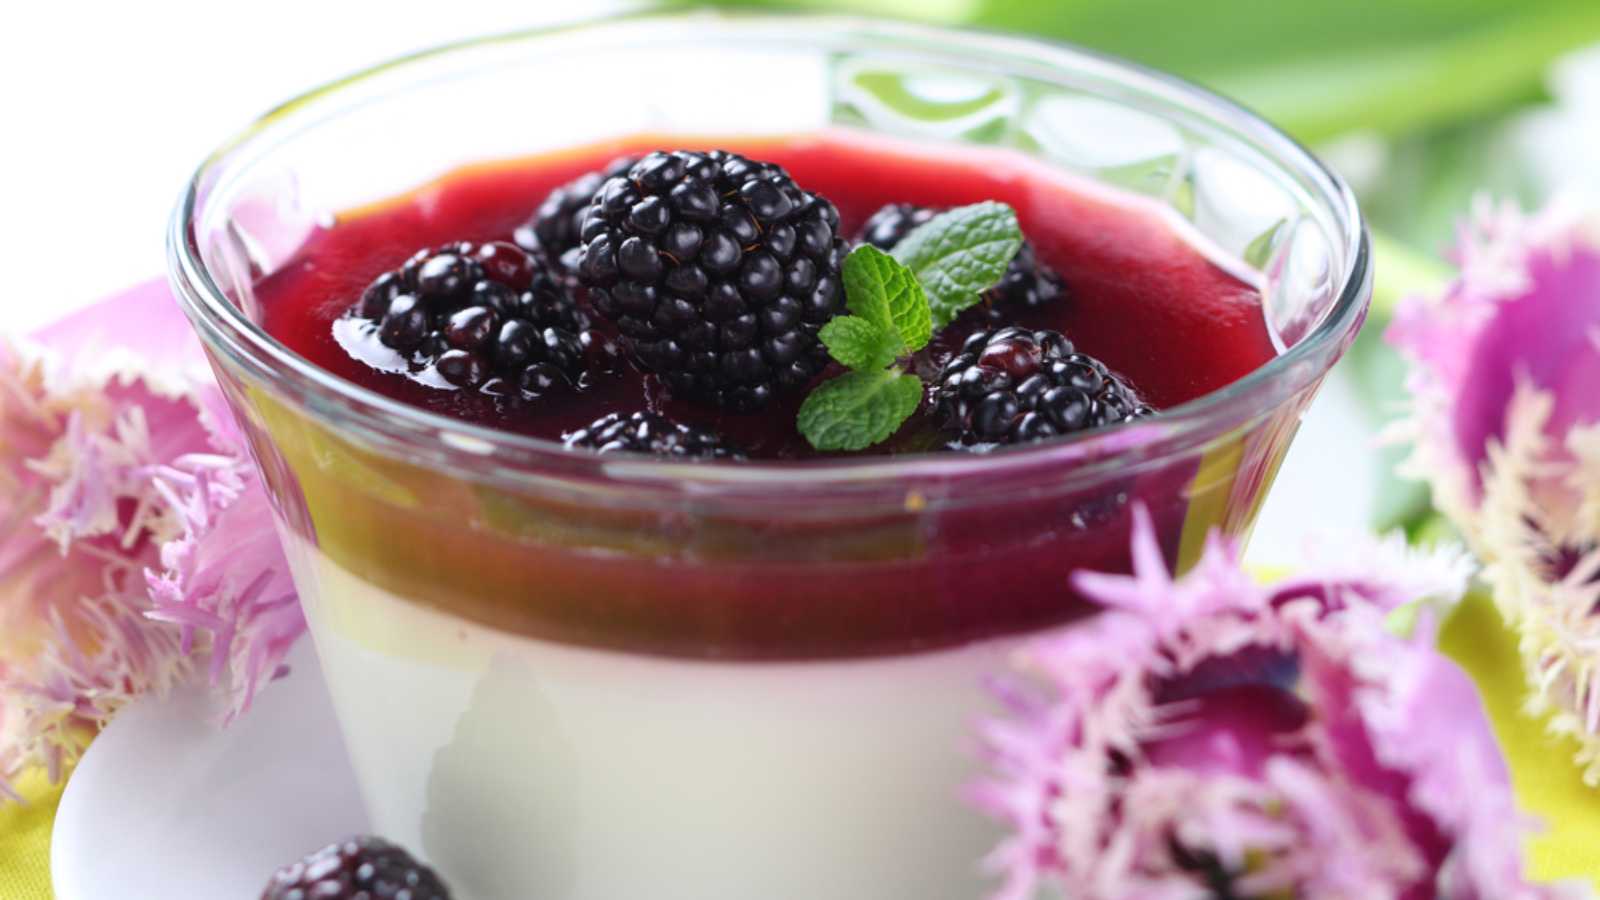 A glass of fresh blackberries and mint atop a delectable dessert.